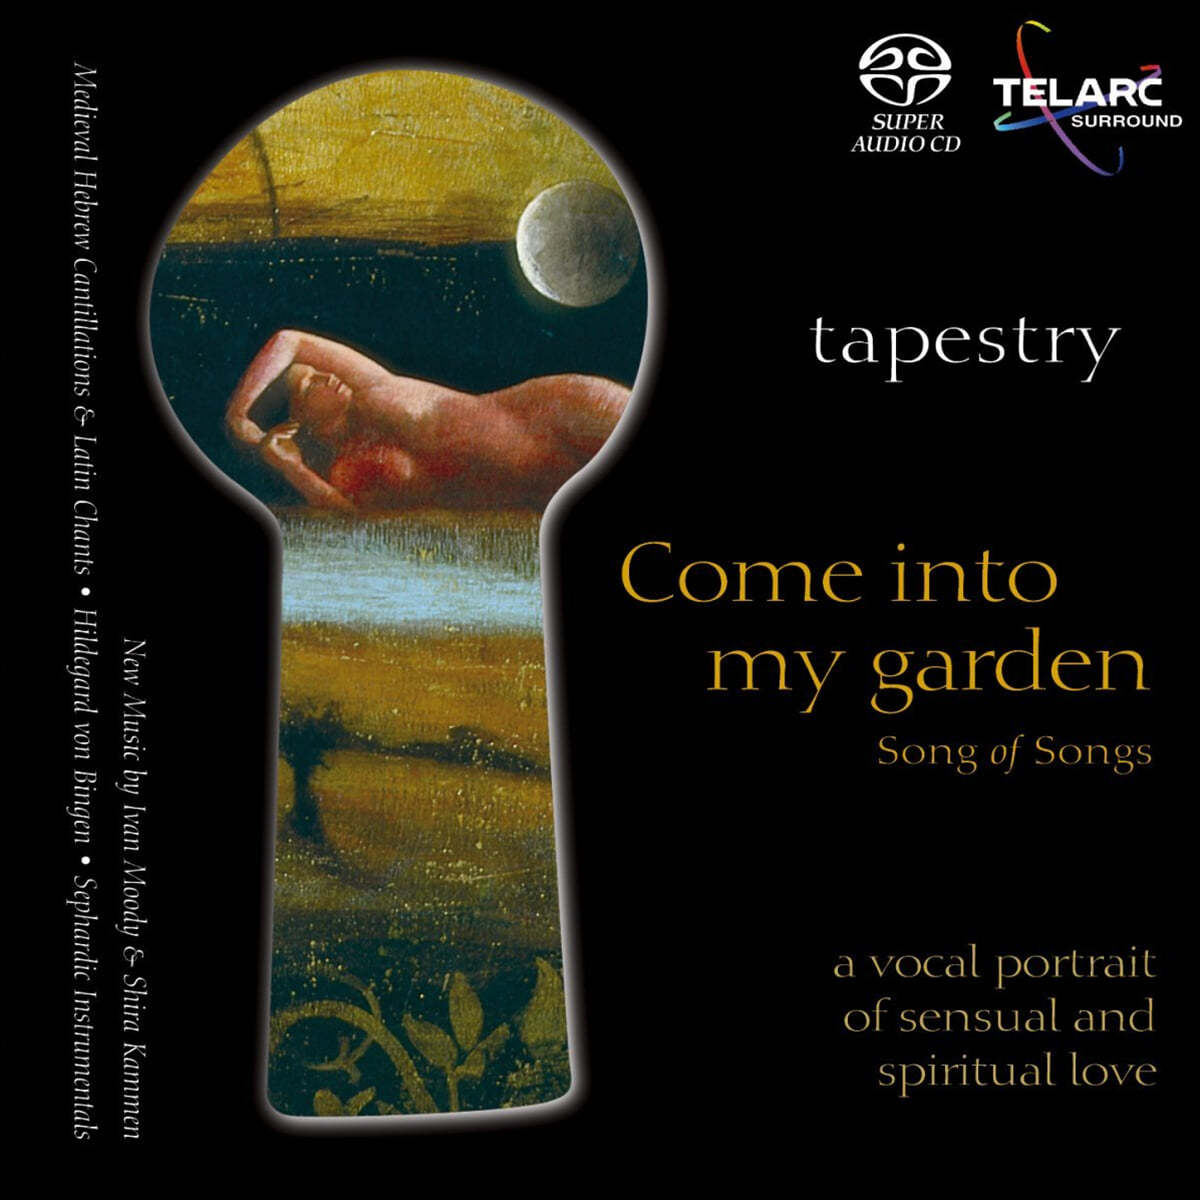 Tapestry 성서 텍스트를 가사로 한 작품 모음집 (Come into my Garden - Songs of Songs) 